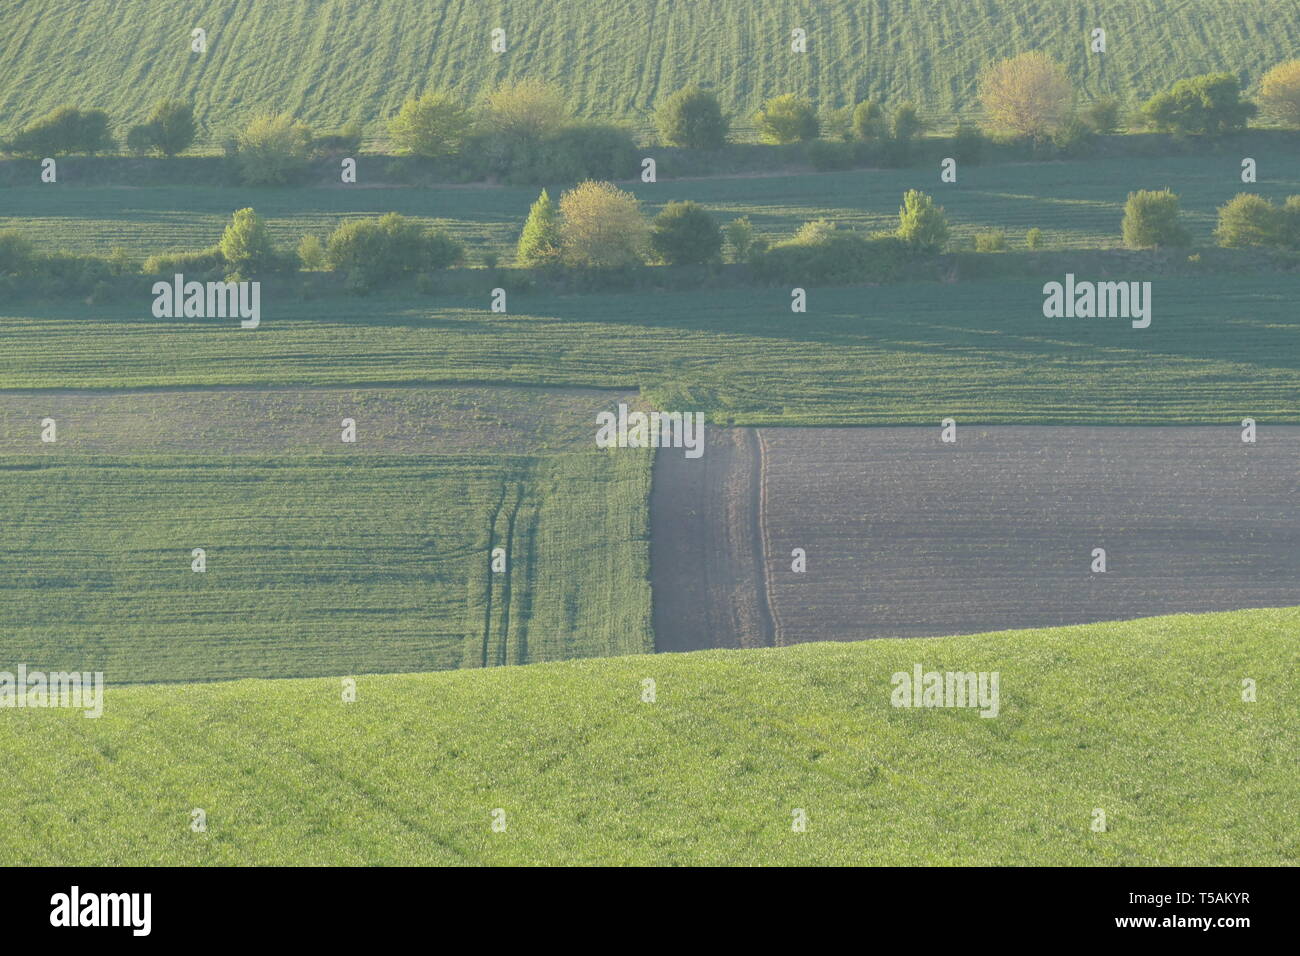 Agricultural land. Treated fields in the plane. Growing wheat. Beautiful psyz. Stock Photo